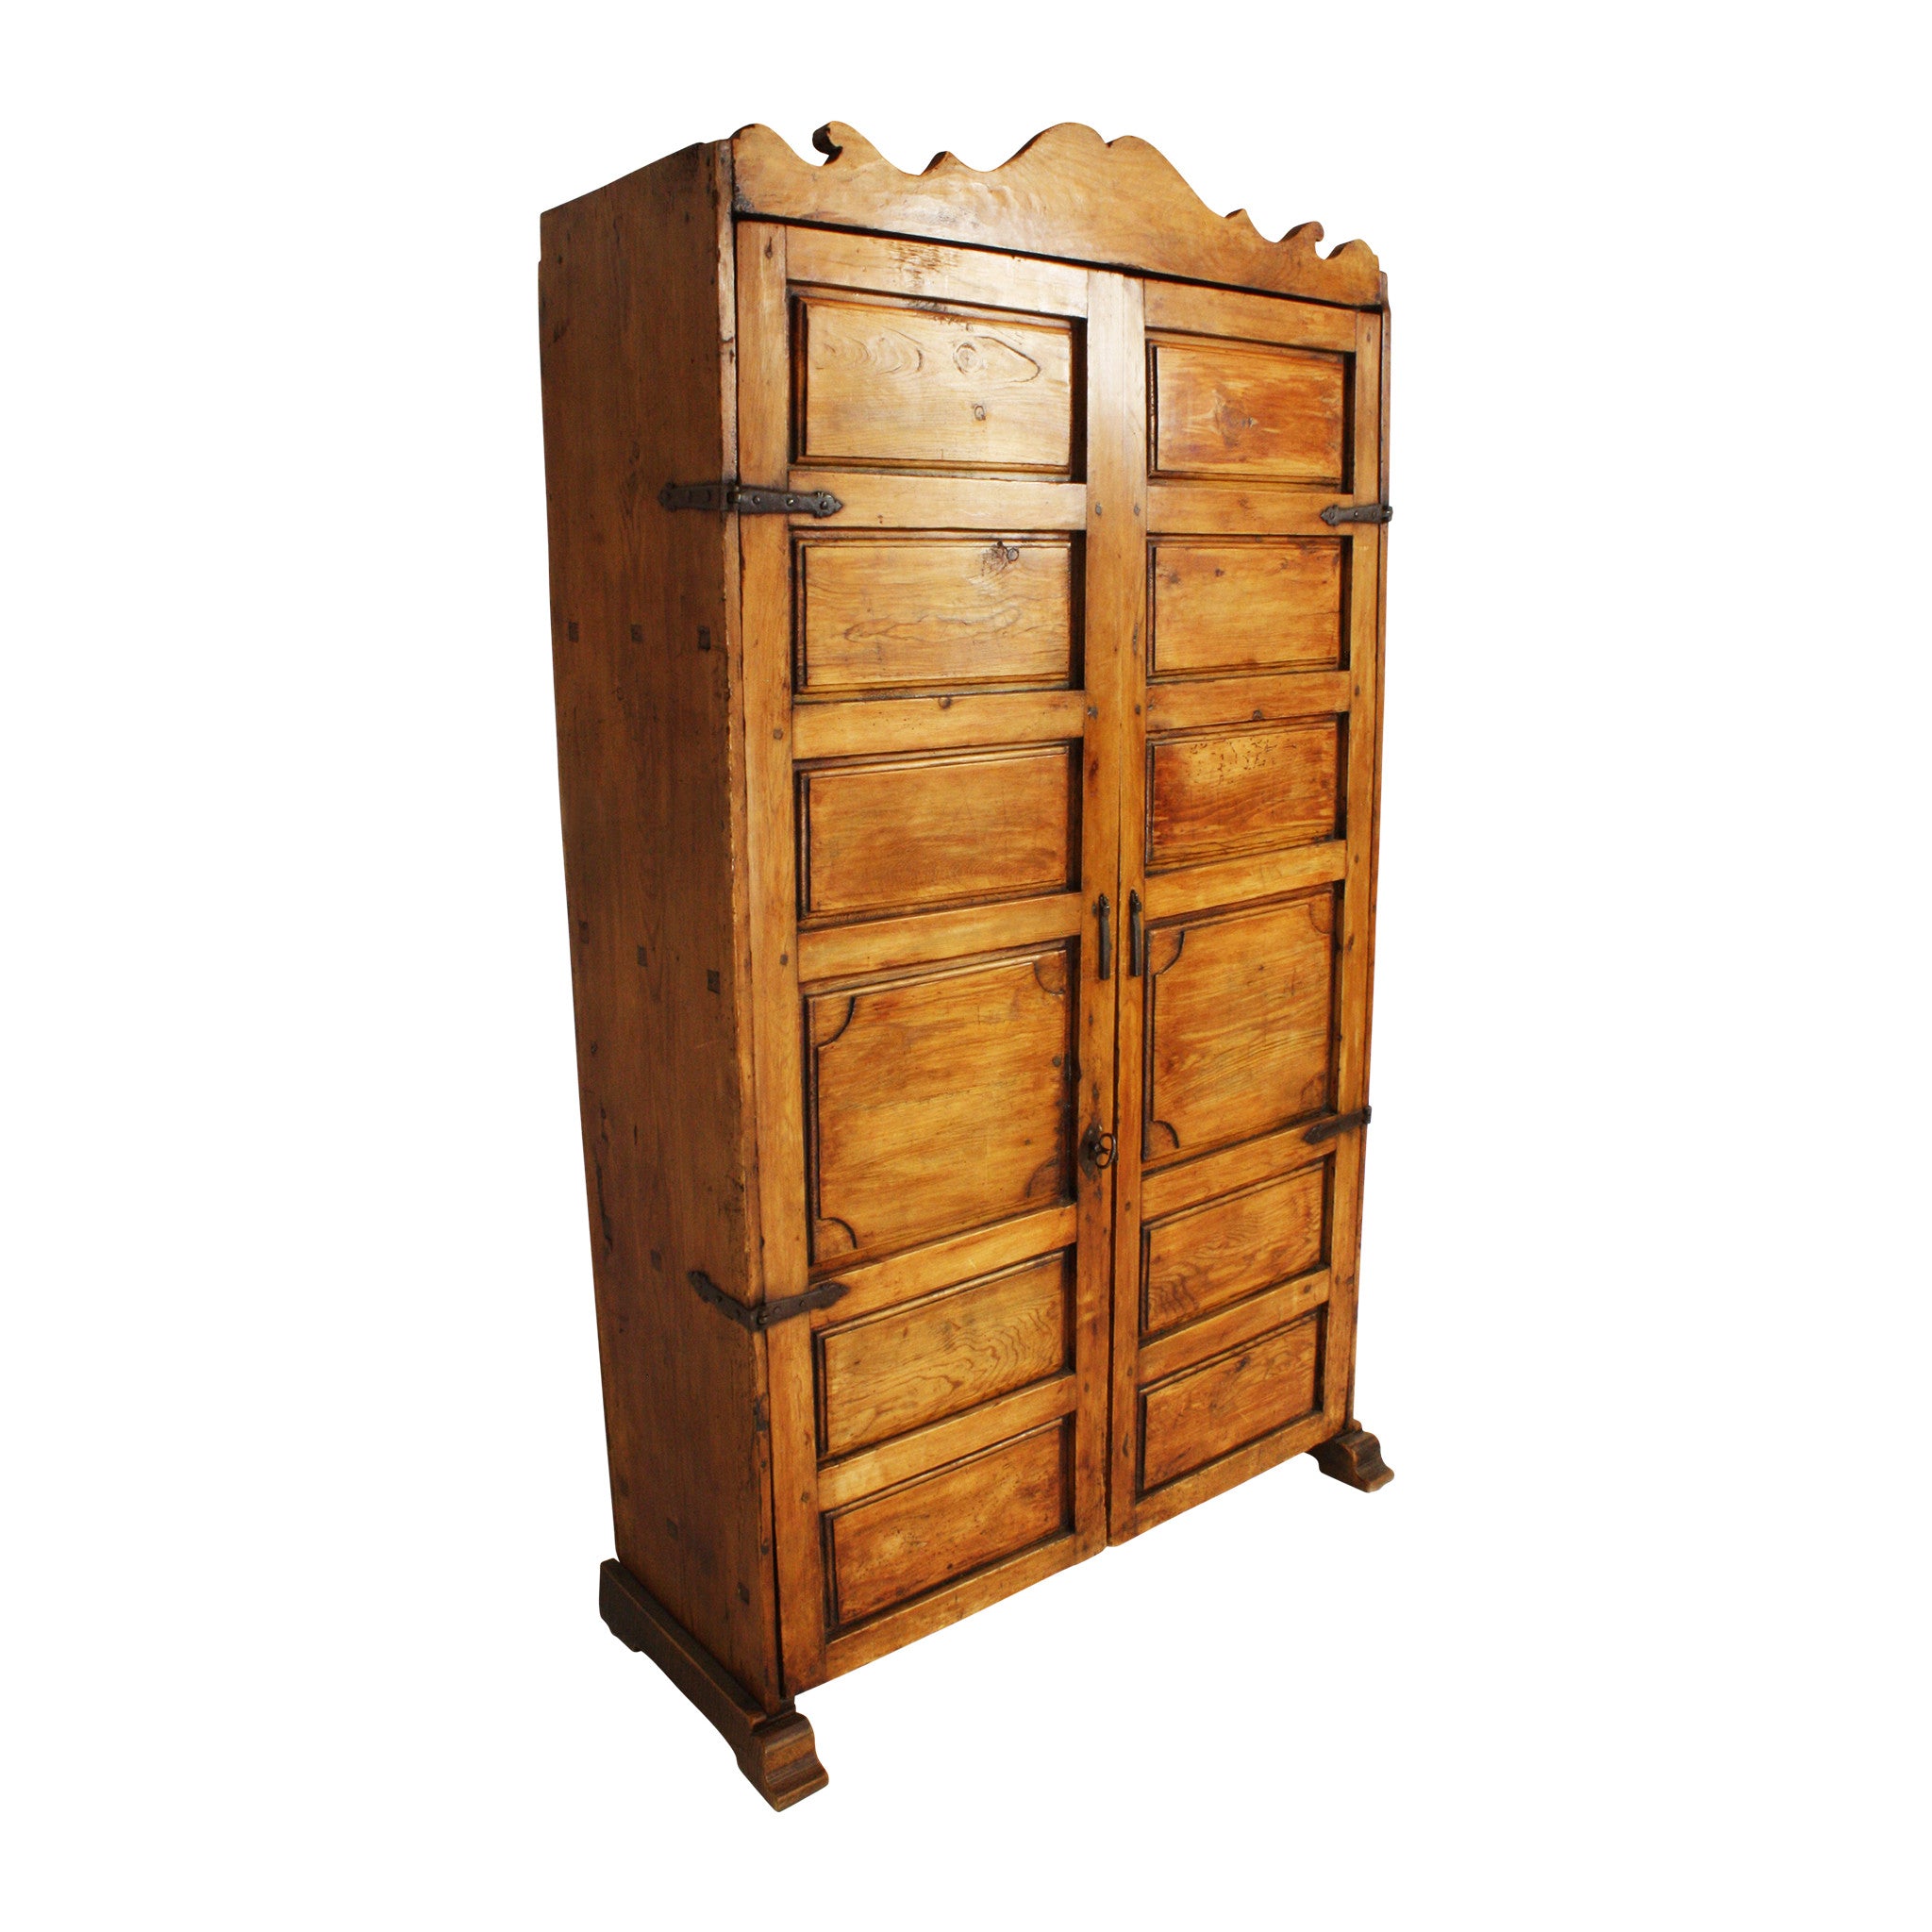 ski-country-antiques - Spanish Walnut & Oak Armoire with Shelves